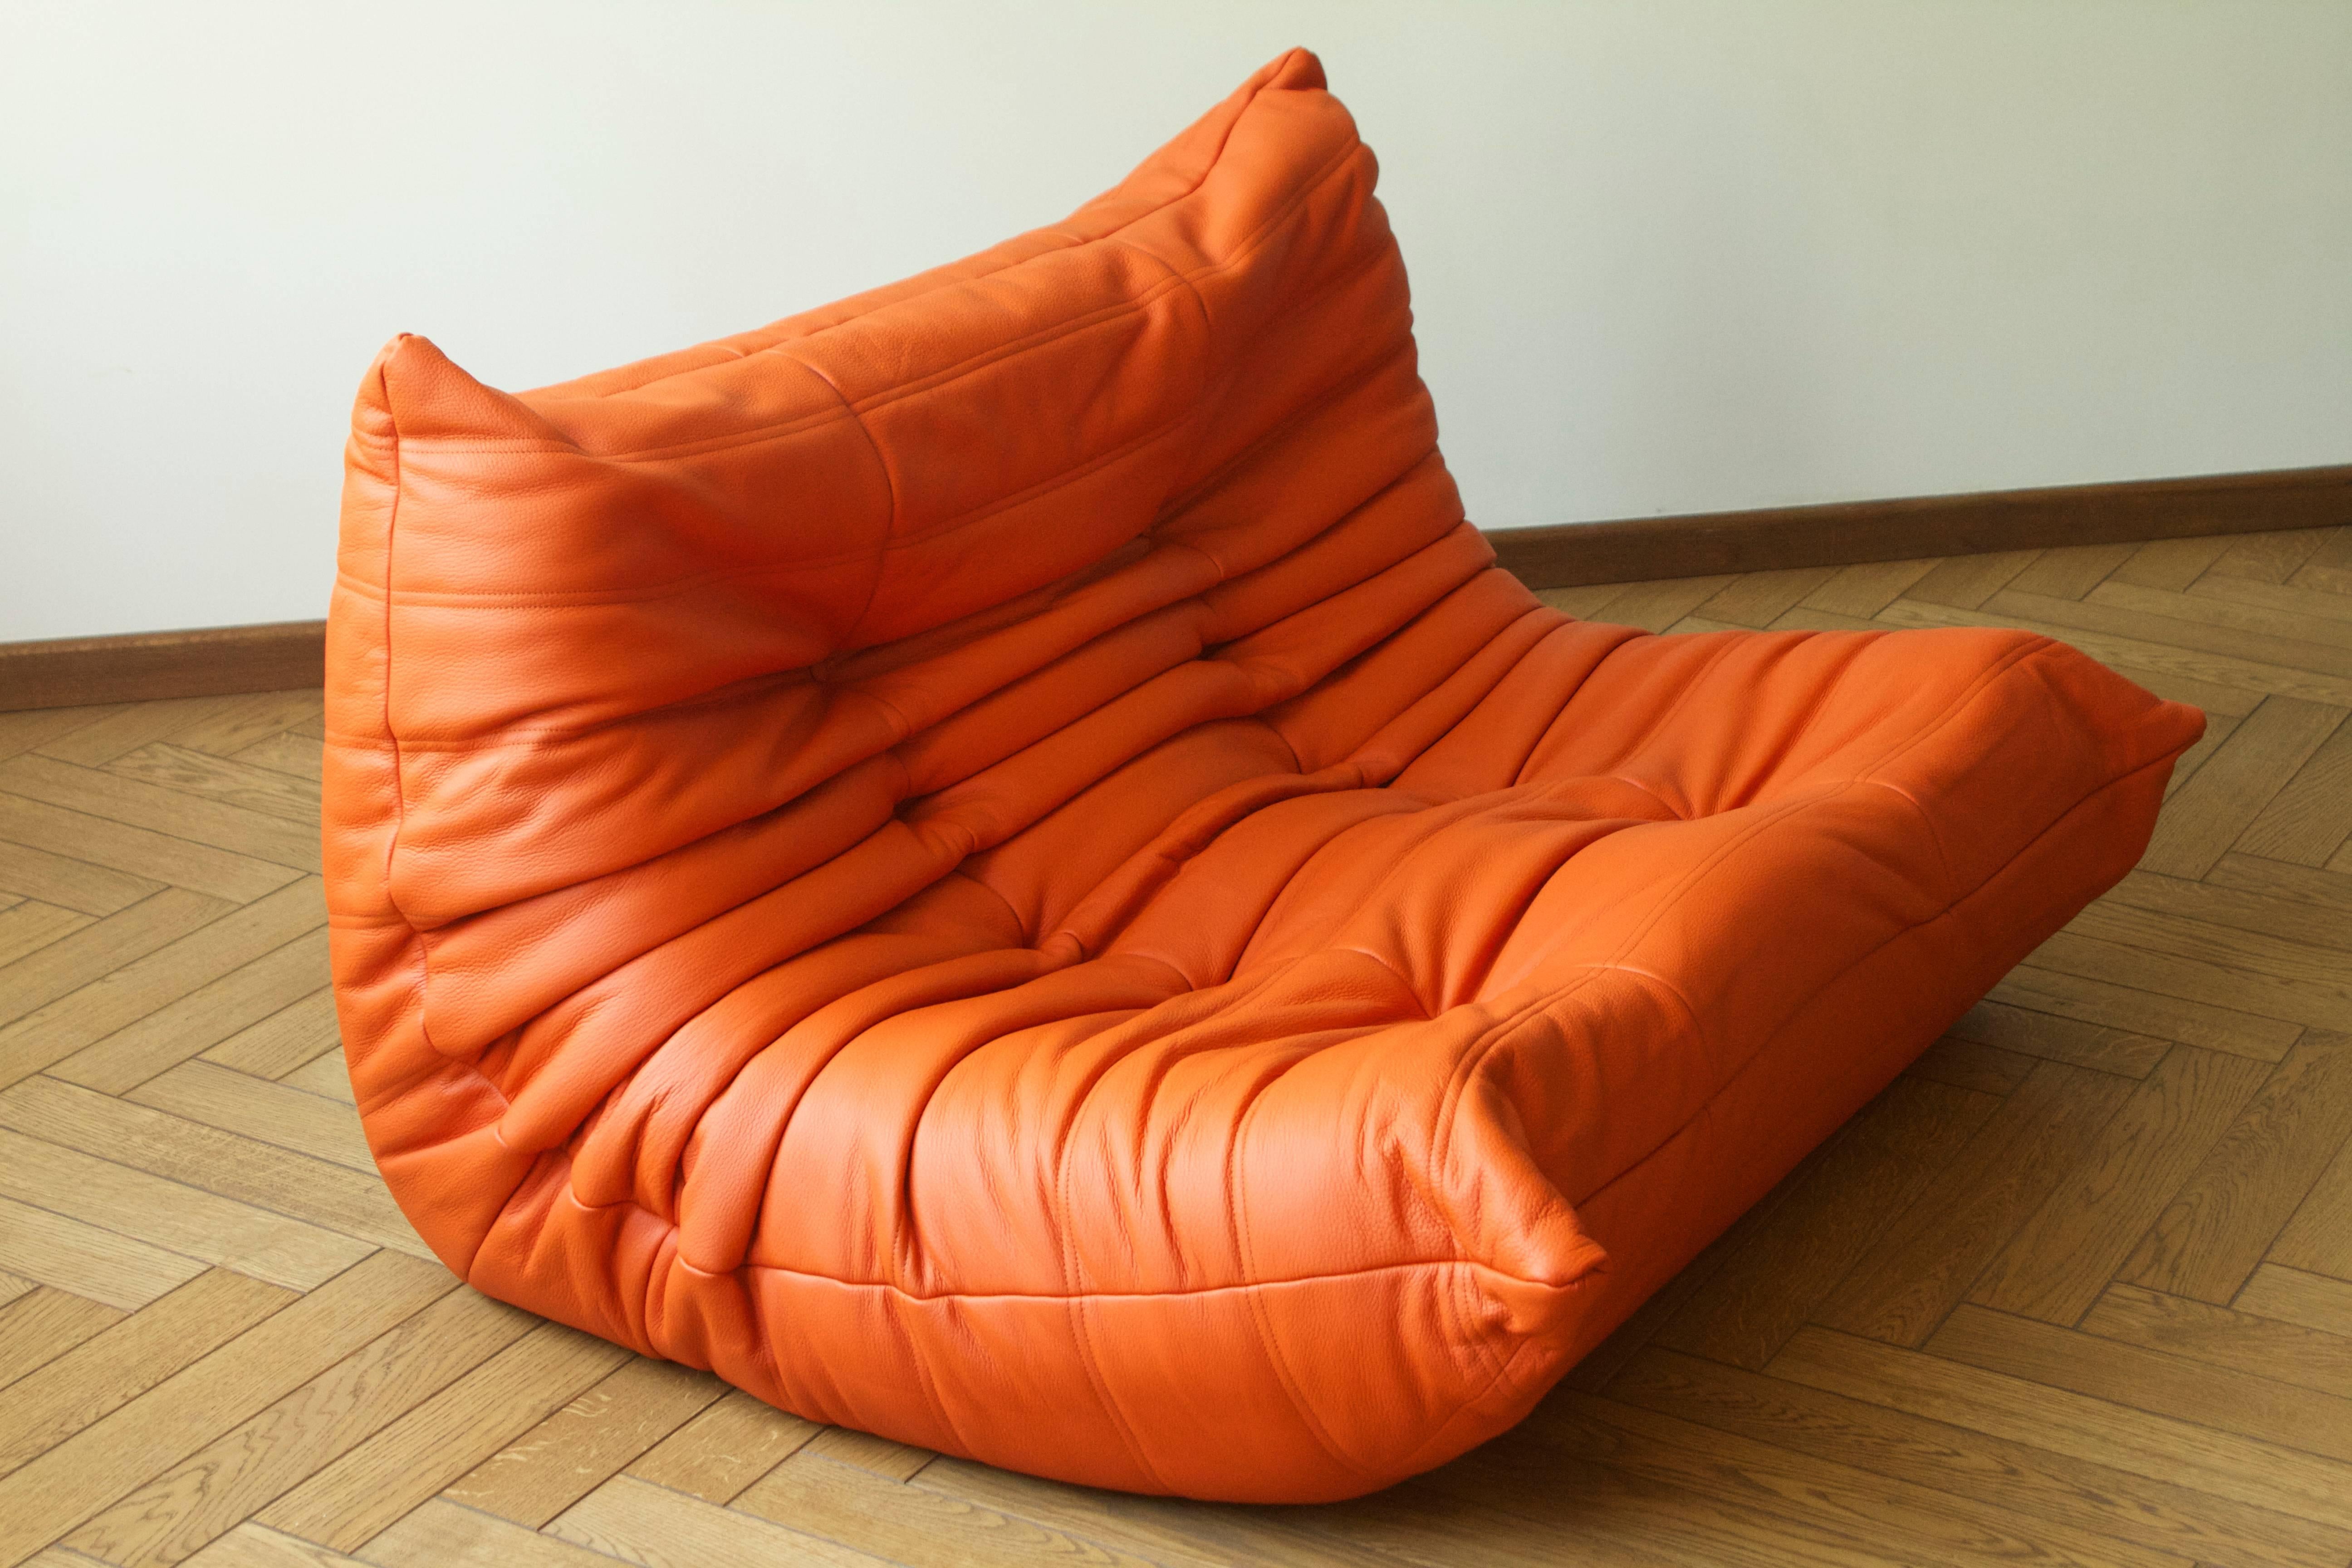 This two-seat Togo sofa (70 x 131 x 102 cm) was designed by Michel Ducaroy in 1973 and was manufactured by Ligne Roset in France, produced in the 1990s. It has been reupholstered in orange leather and it features the original Ligne Roset logo at the